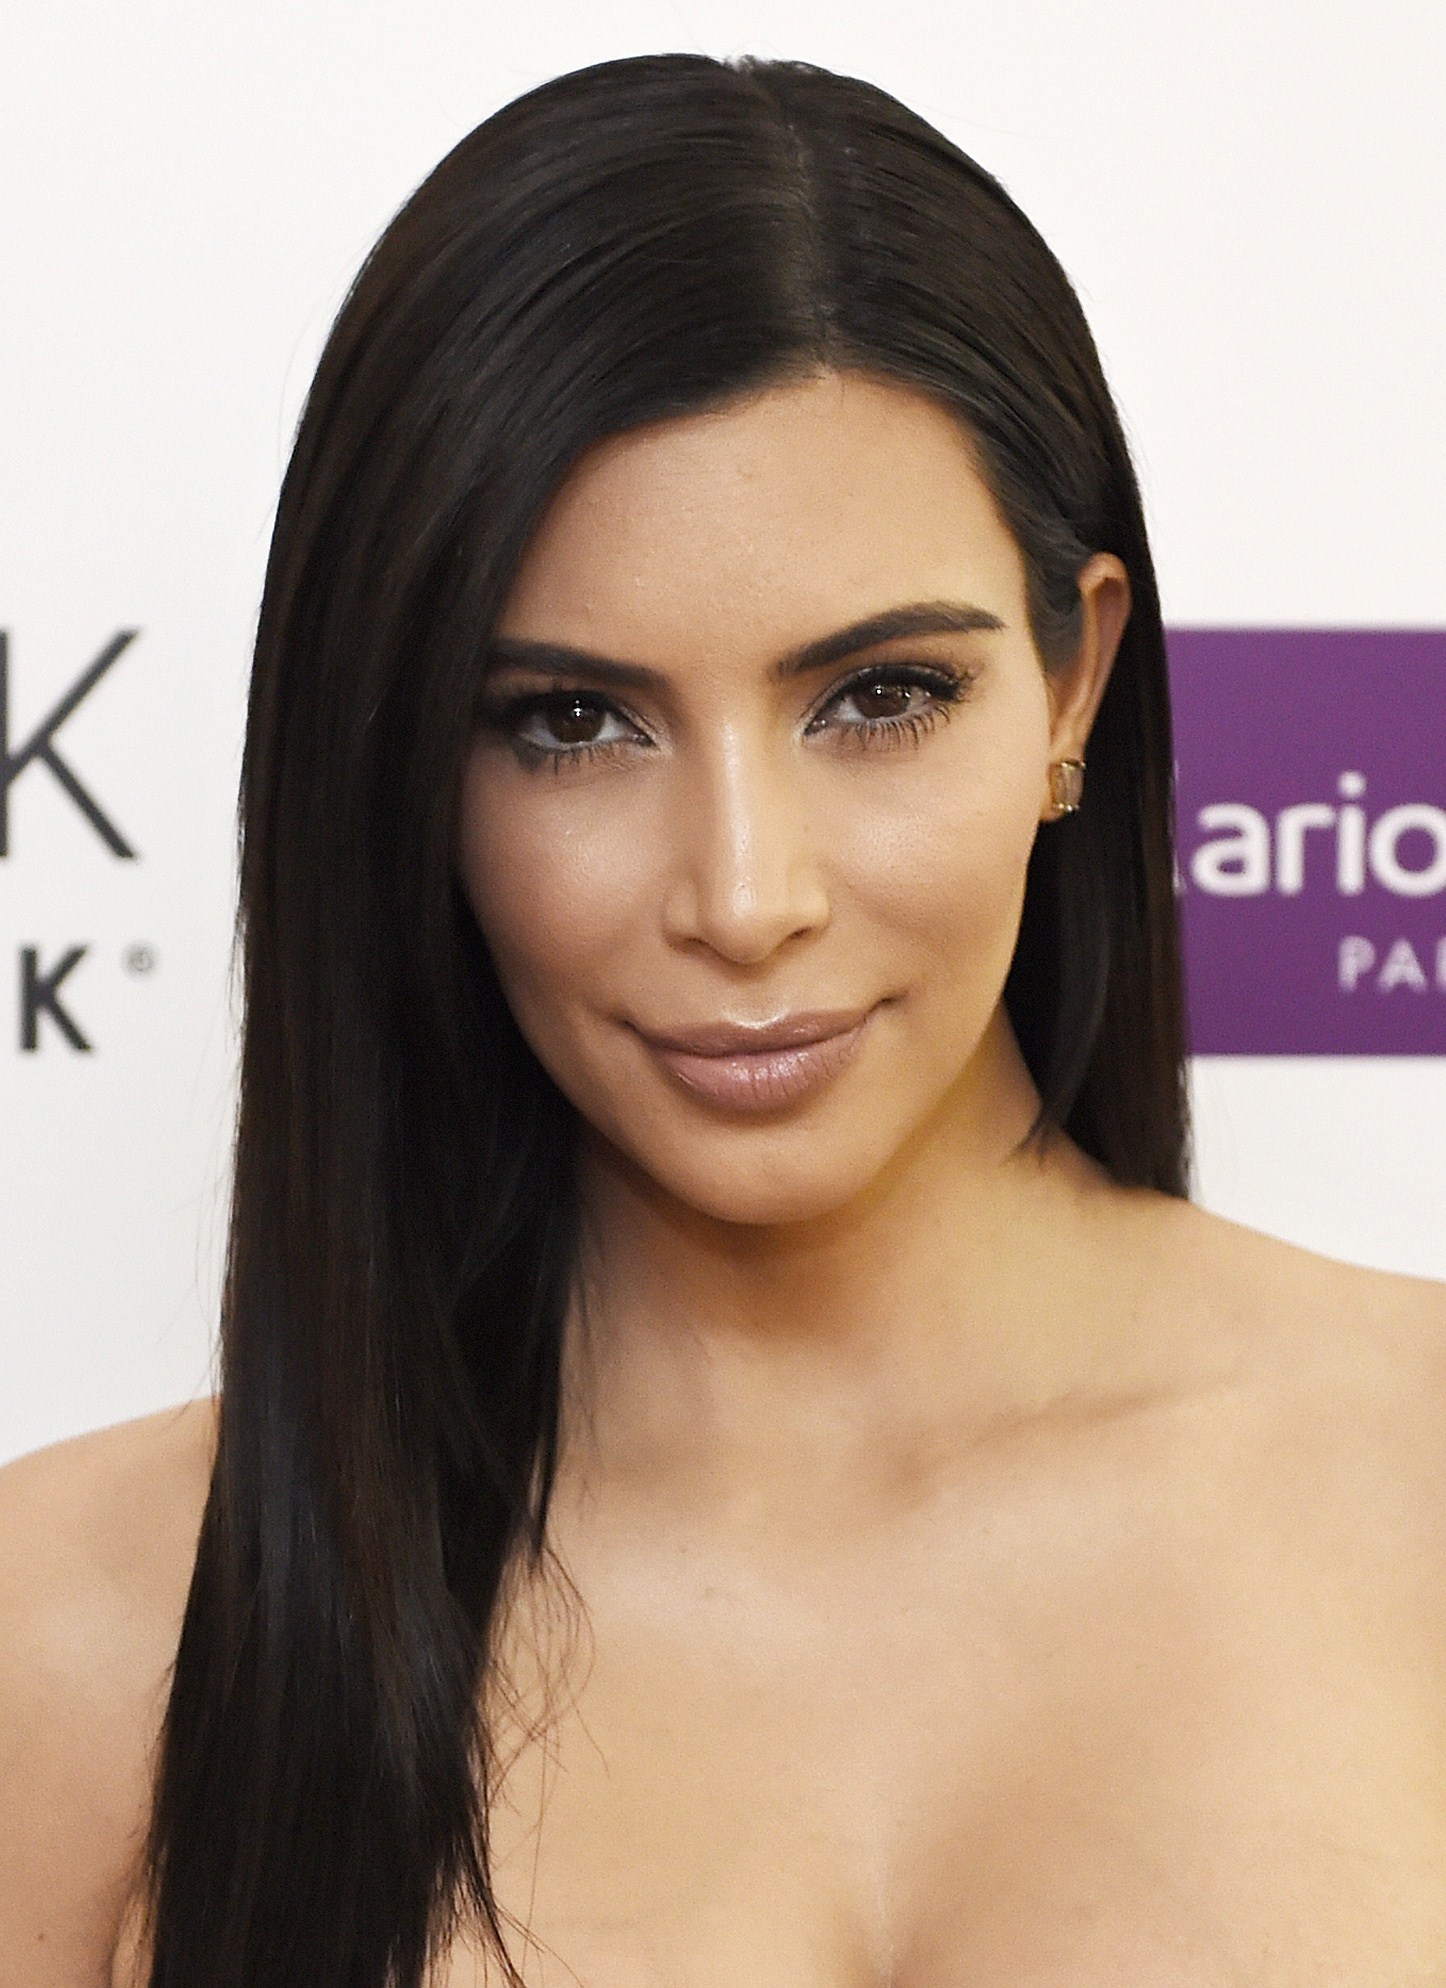 What Giorgio Armani Foundation Does Kim Kardashian Wear? Here's What To Buy  To Steal Her Flawless Look